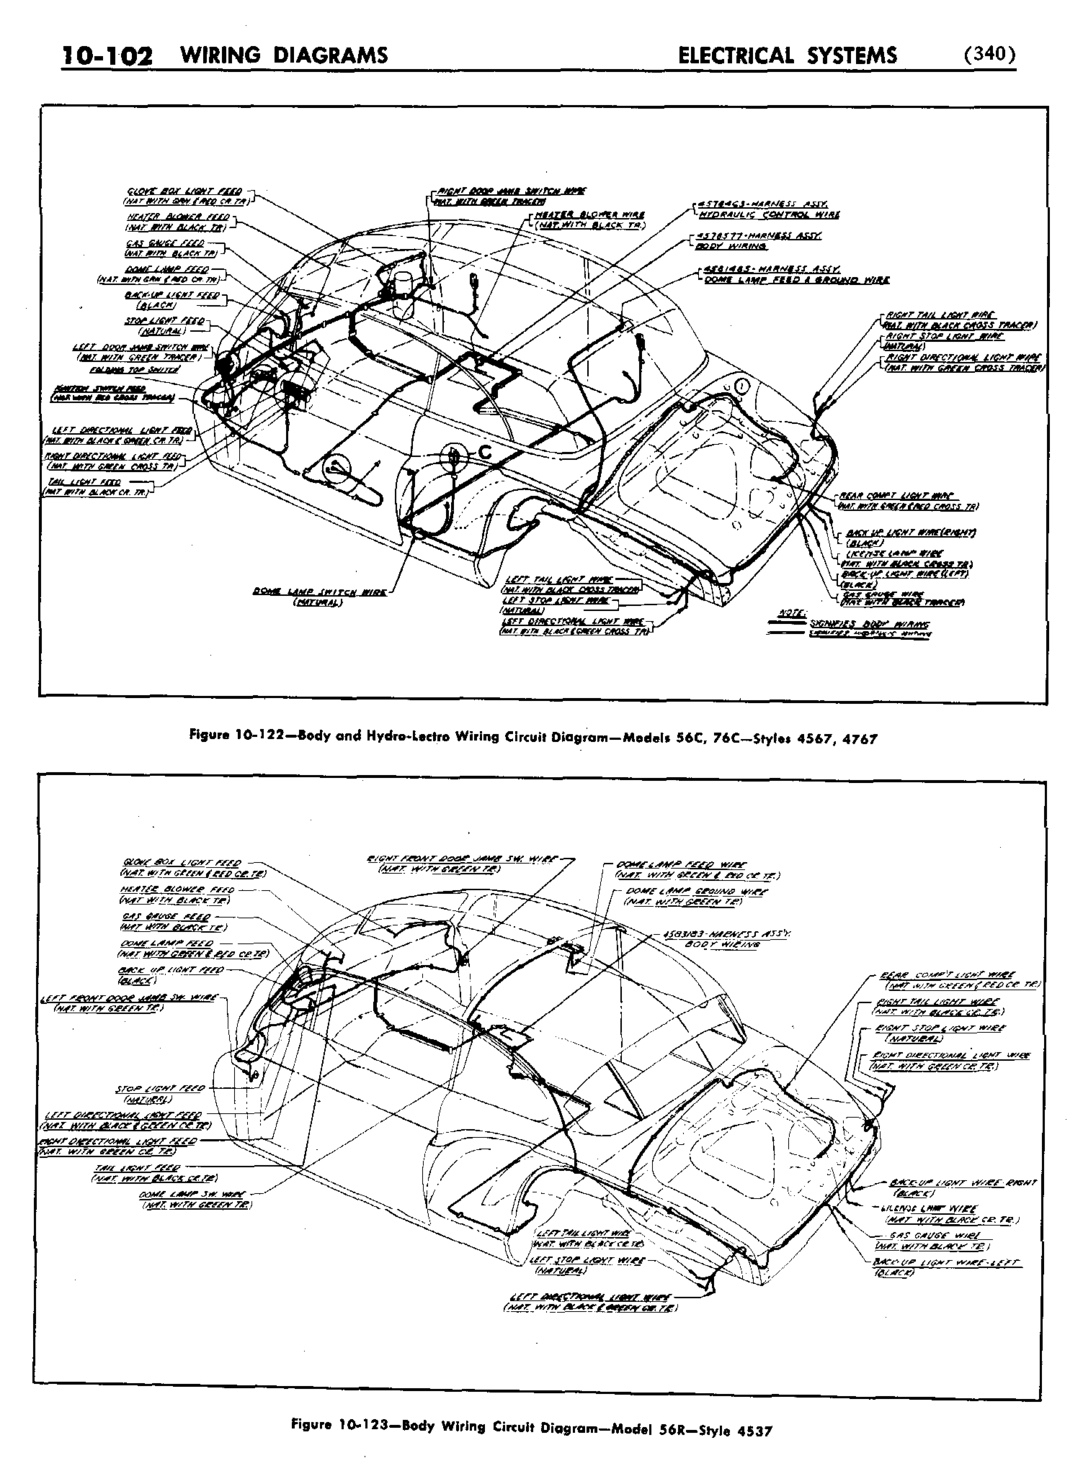 n_11 1950 Buick Shop Manual - Electrical Systems-102-102.jpg